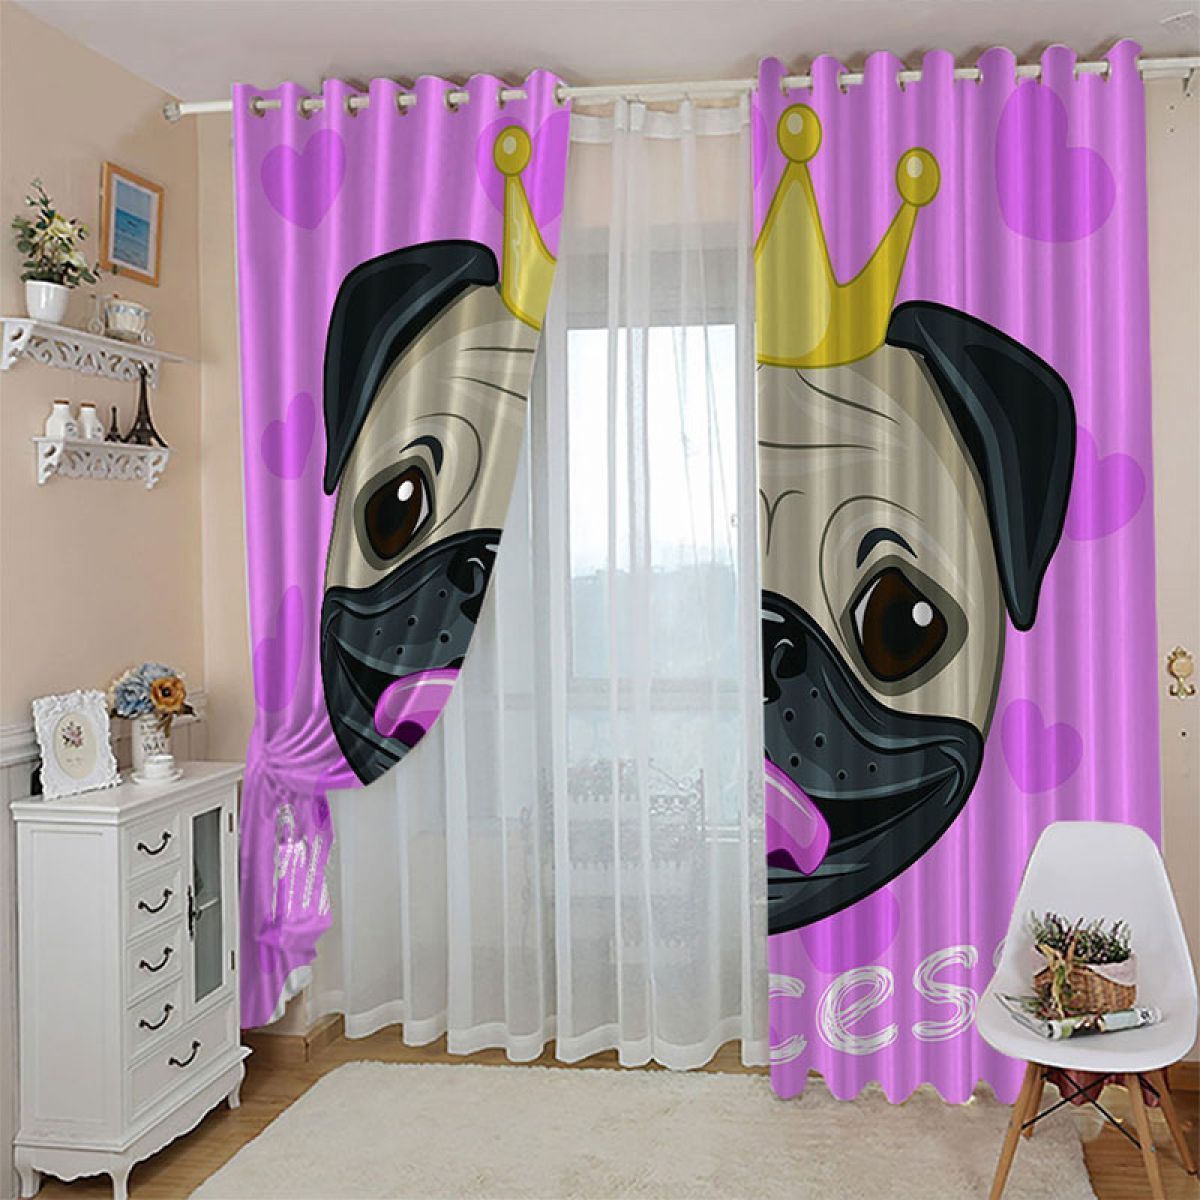 3d Funny Pug With Crown Printed Window Curtain Home Decor